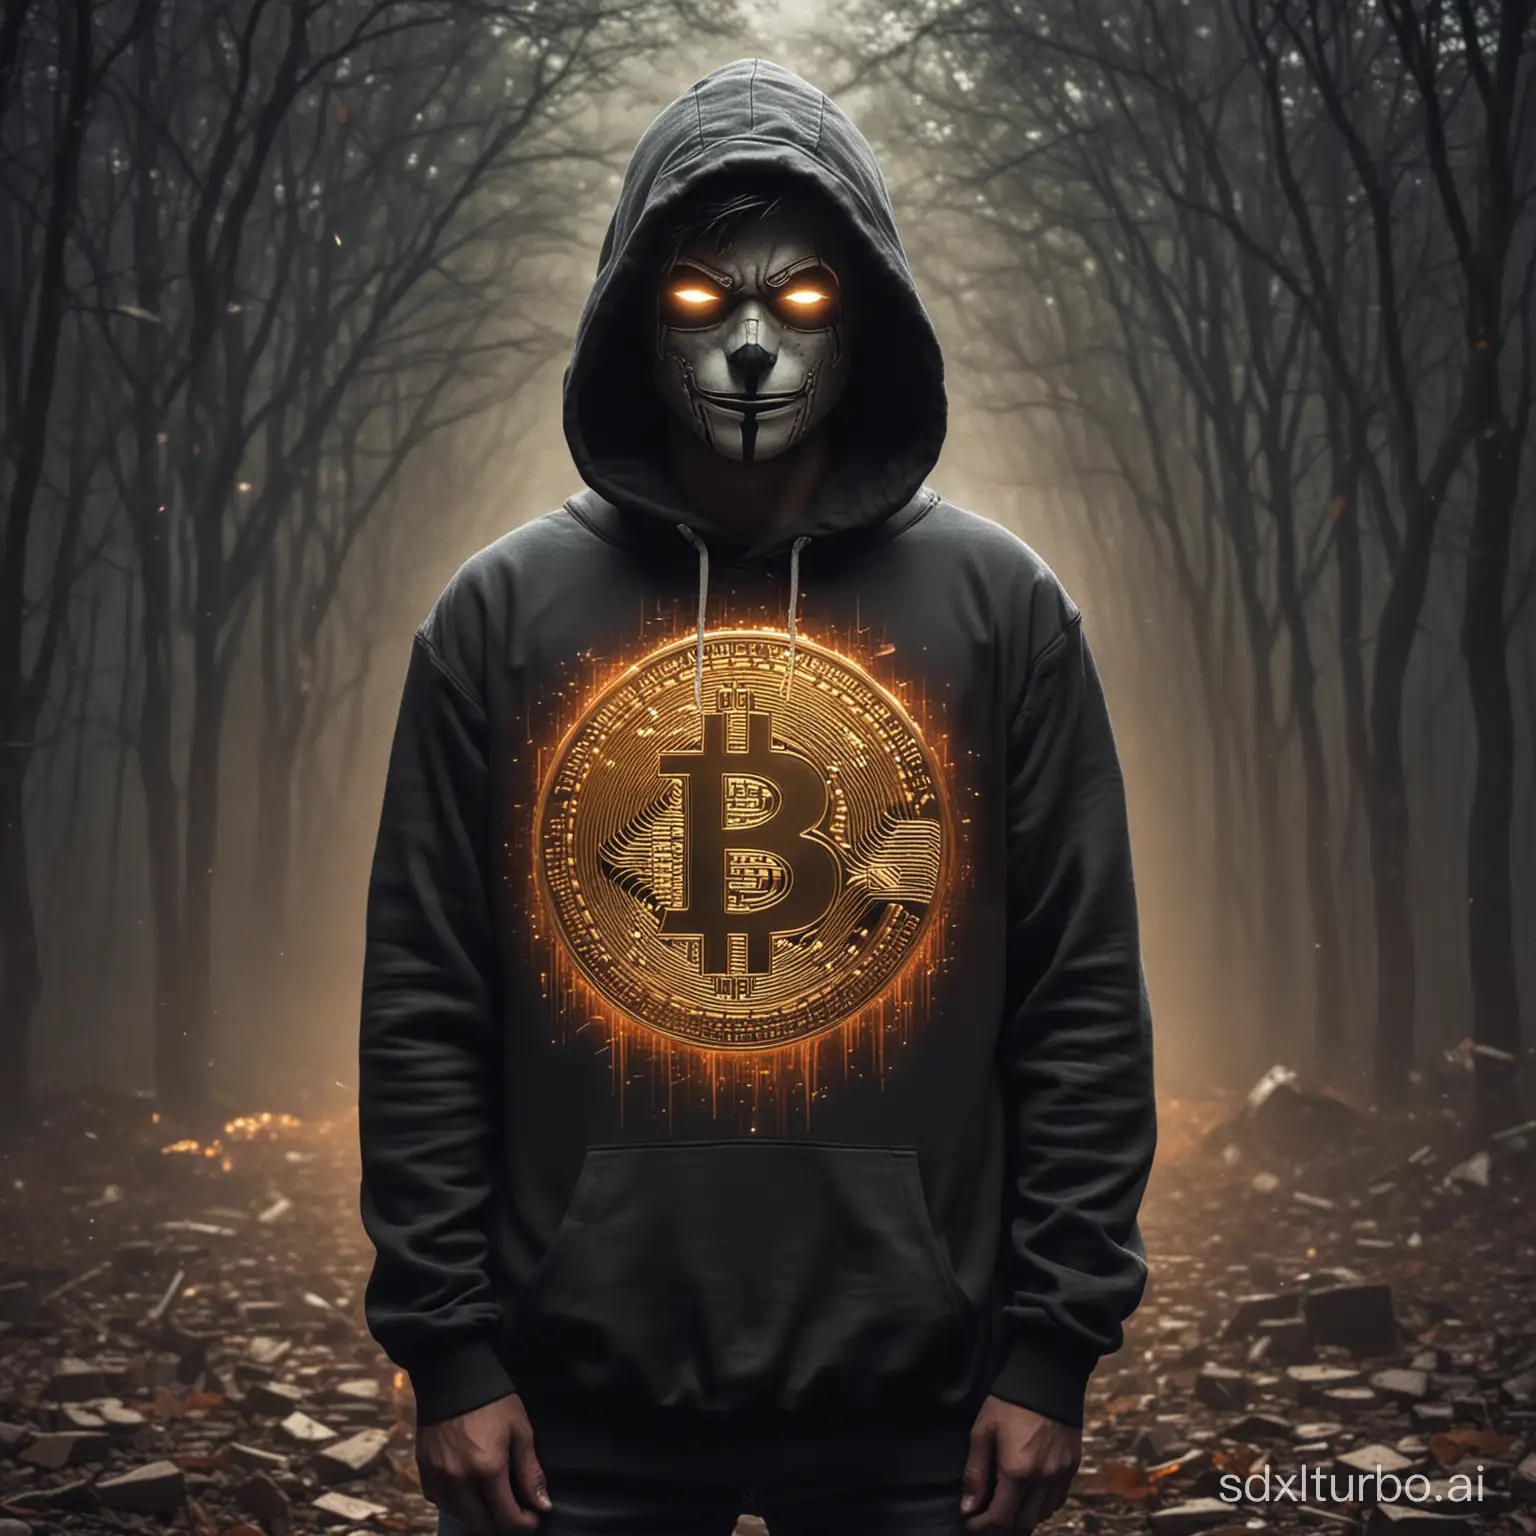 there is a new badass, dark, mysterious memecoin called "BITCOIN WORLD ORDER" and i want something badass for it. imagine a giant anonymous satoshi nakamoto facing us in a dark hoodie where his face isn't visible and his hands are outstretched in front hovering over a giant bitcoin, glowing radiantly and triumphantly in front